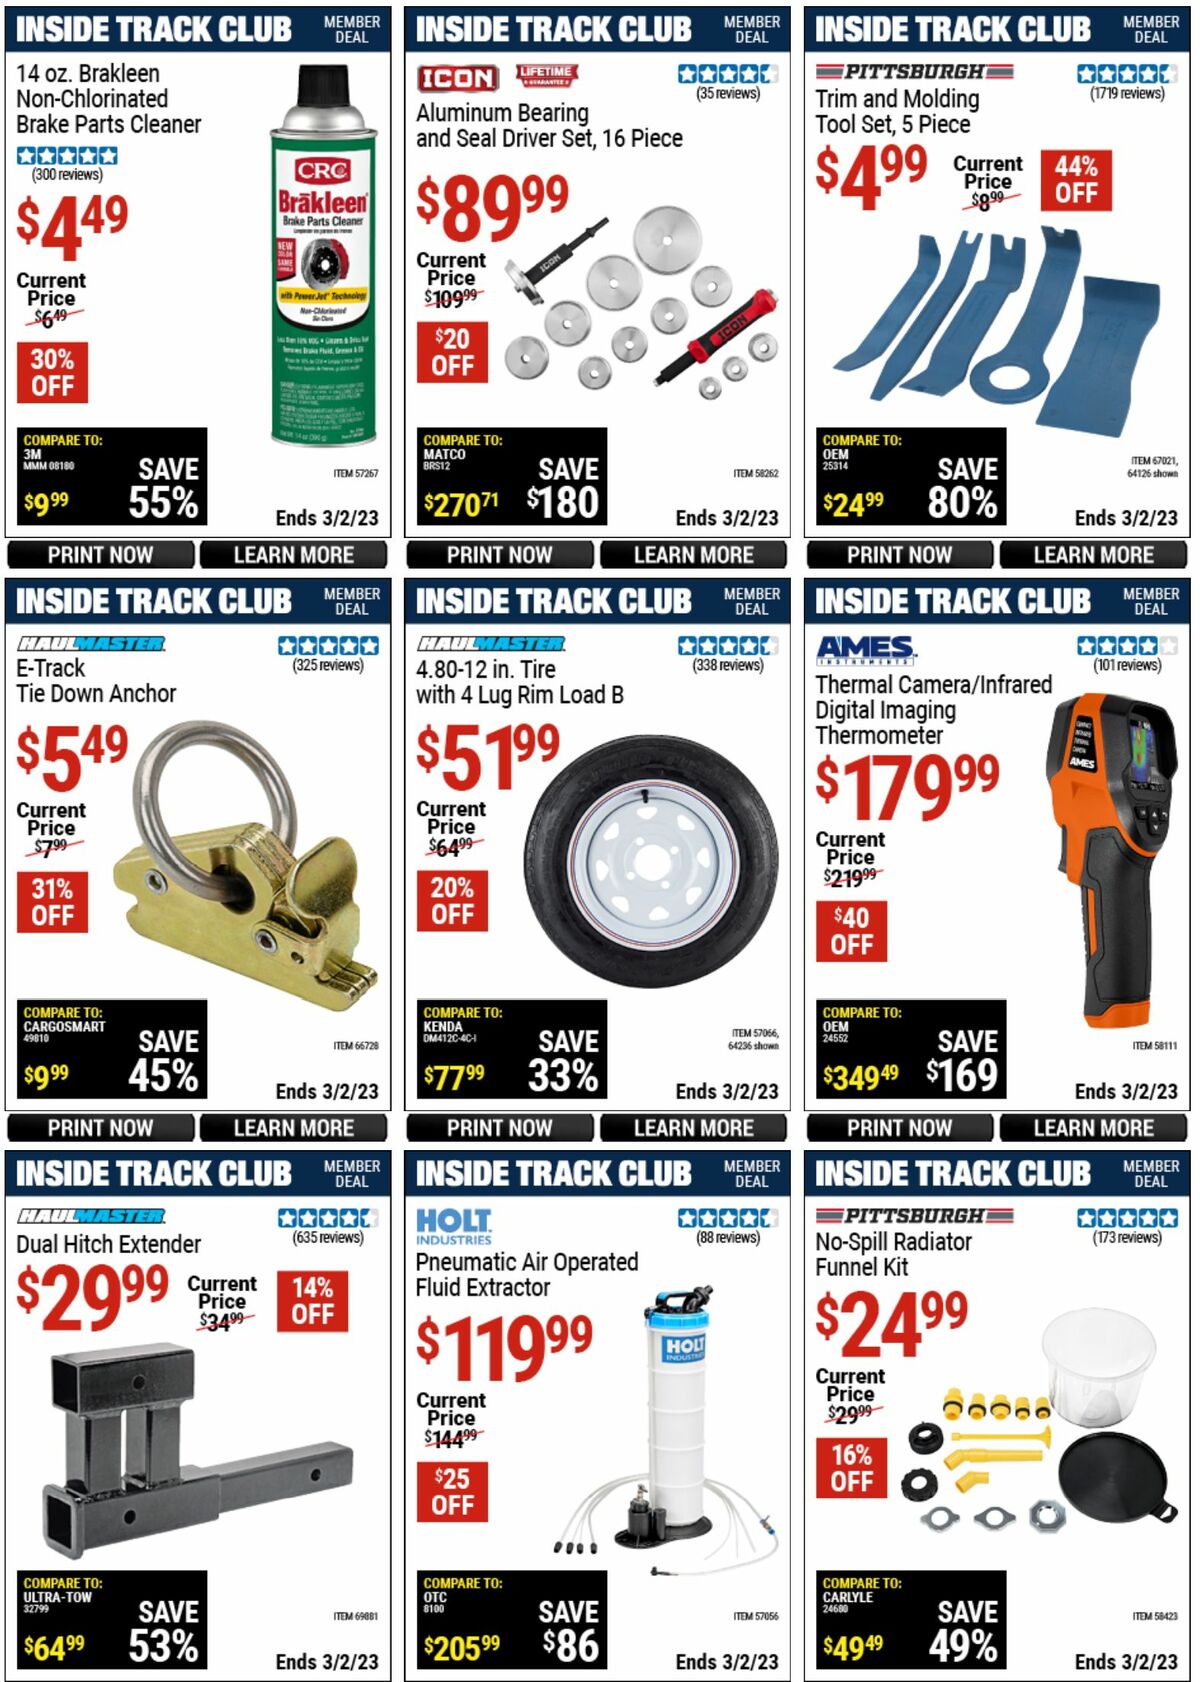 Harbor Freight Tools Inside Track Club Member Deals Weekly Ad from February 5